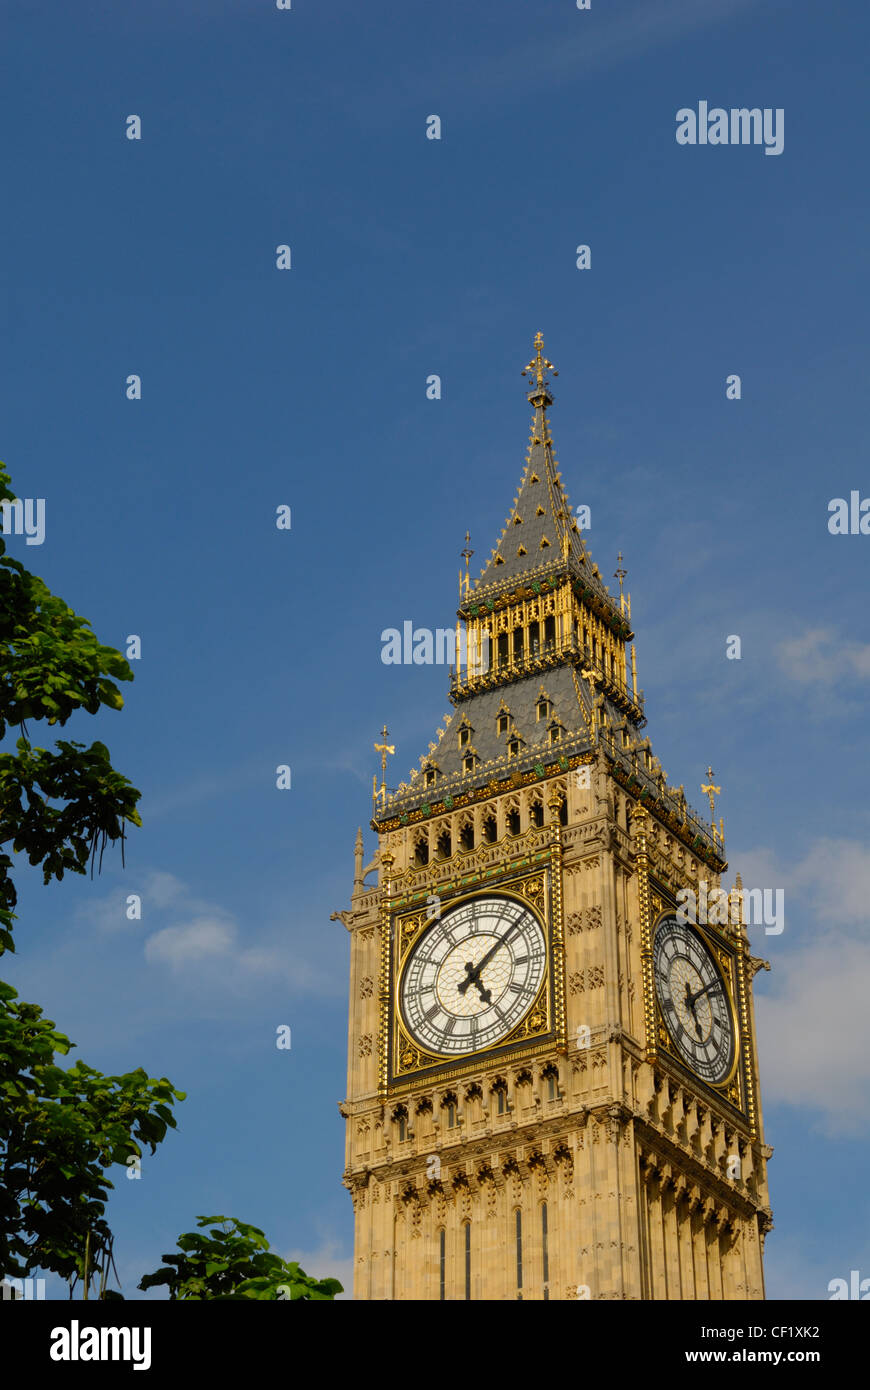 Big Ben, one of London's most iconic landmarks, against a blue sky. Big Ben is actually the name of the Great Bell in the clock Stock Photo